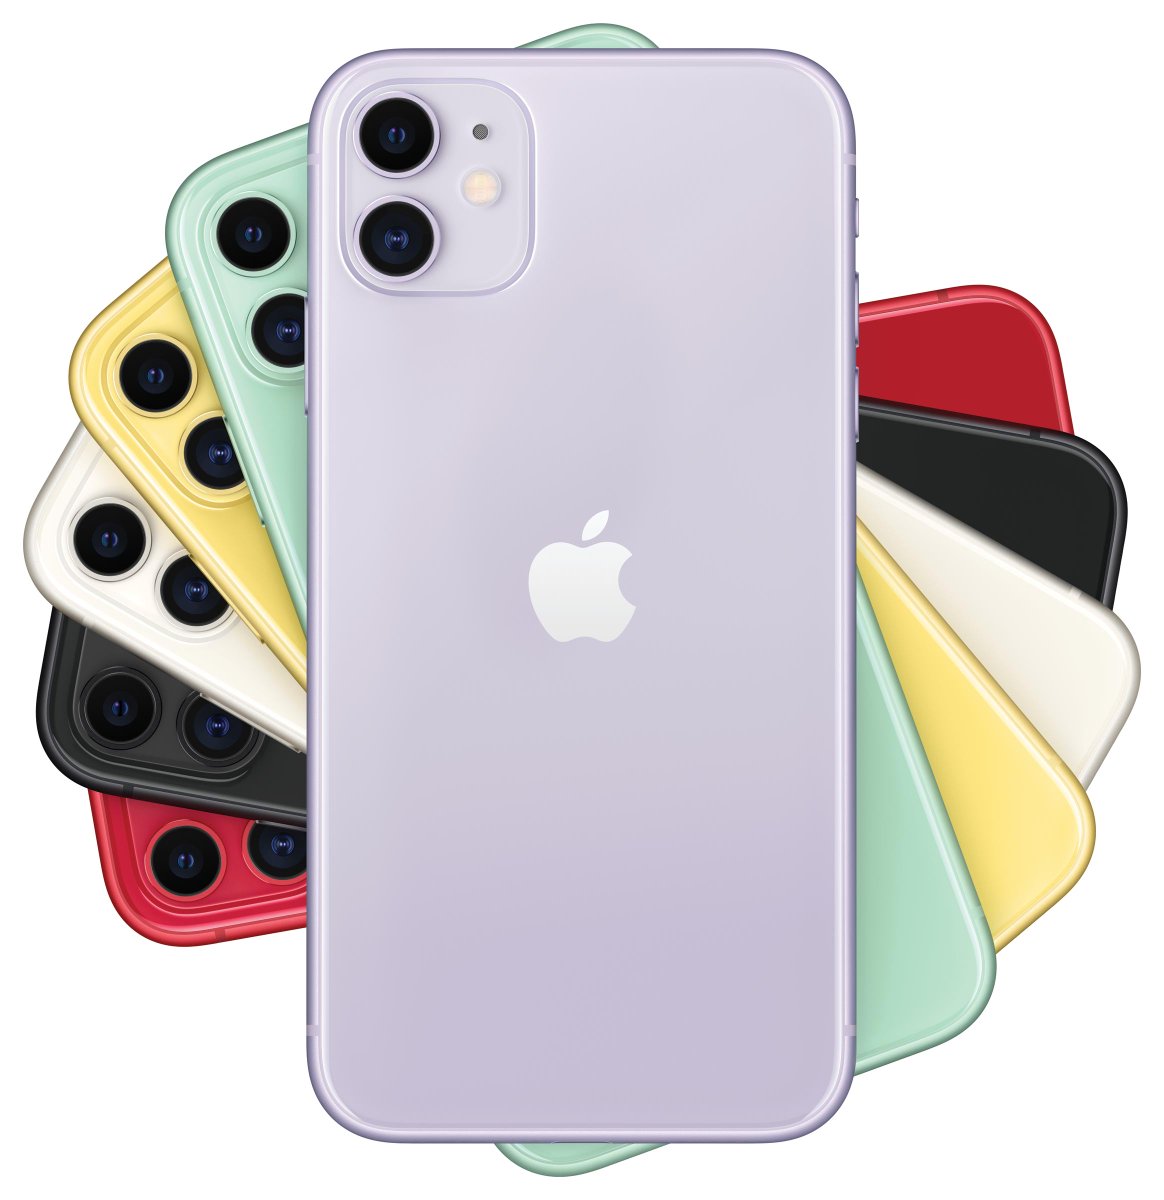 Visible Which Iphone 11 Color Will You Choose Six Stunning New Colors Including Purple Green Yellow Black White And Product Red Available At T Co 3yysoym9ja On 9 T Co Ahunuxeud6